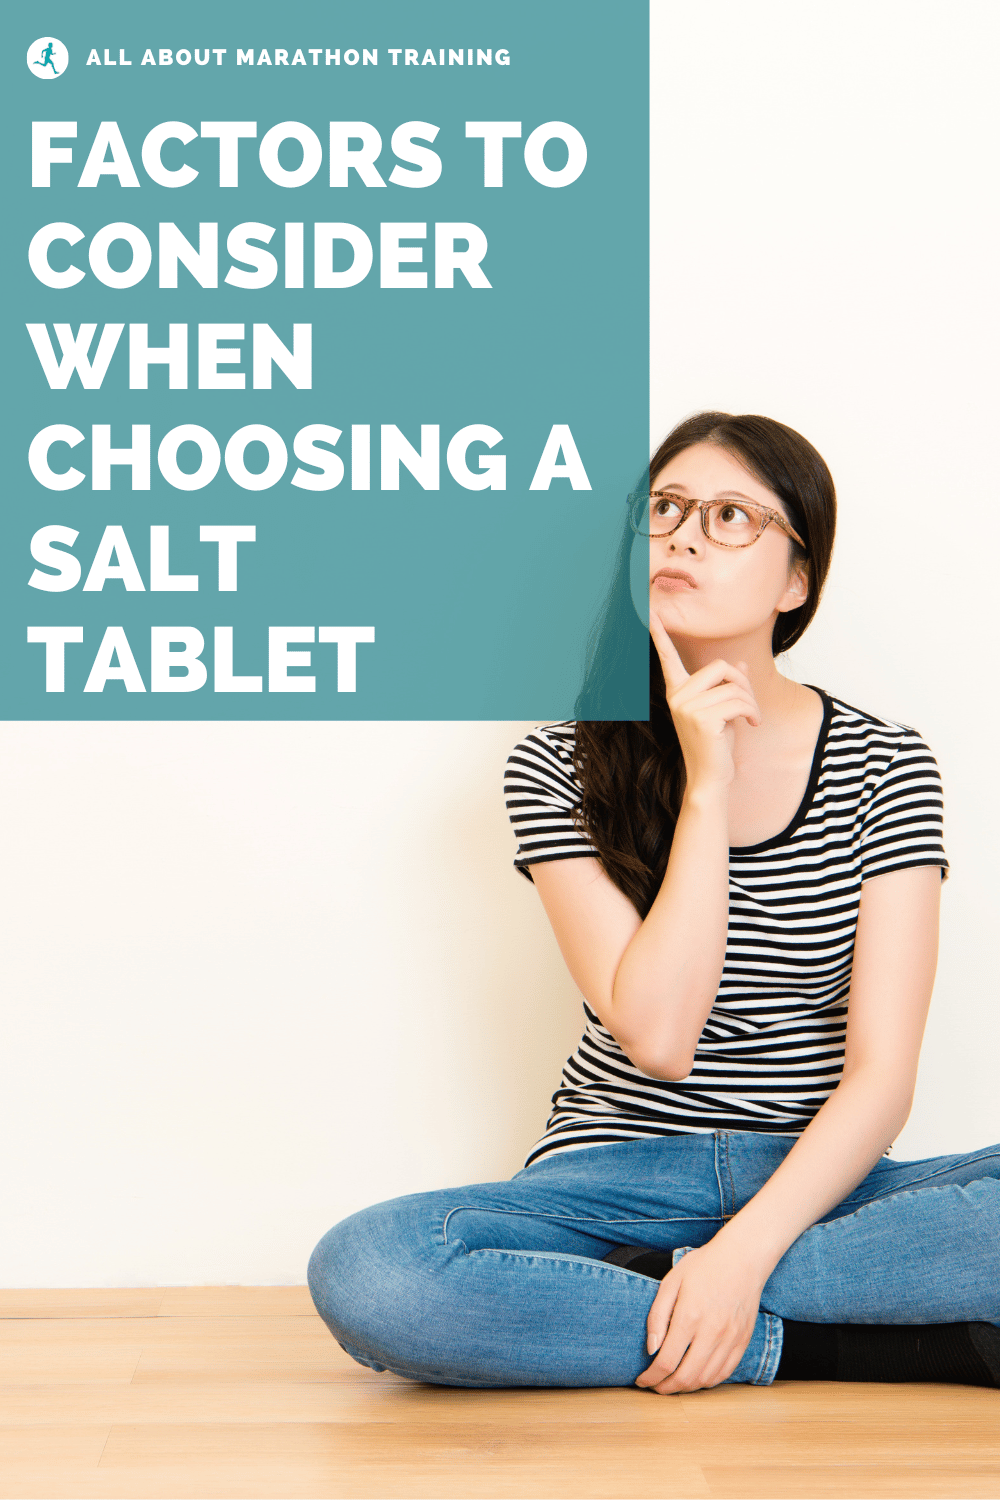 Salt Tablets for Runners Factors to Consider